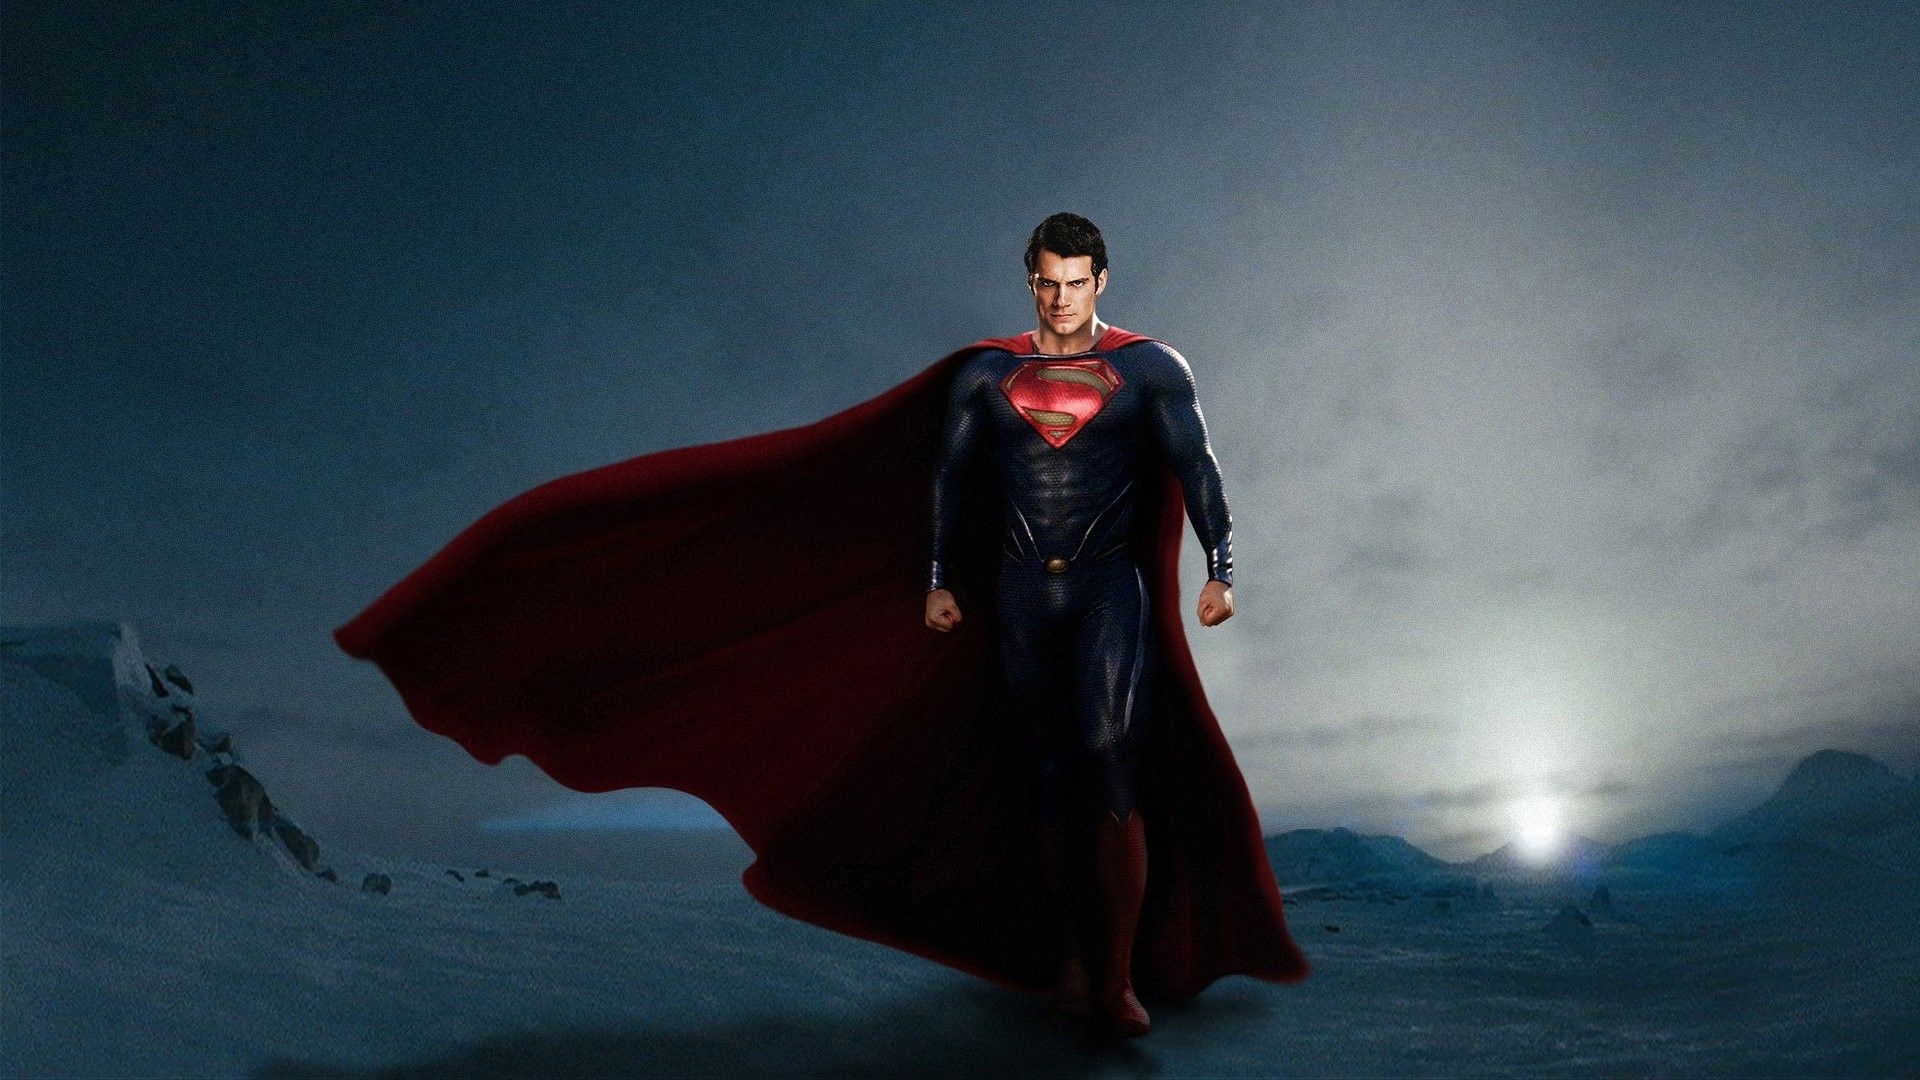 10 New Superman Man Of Steel Hd FULL HD 1920×1080 For PC Background